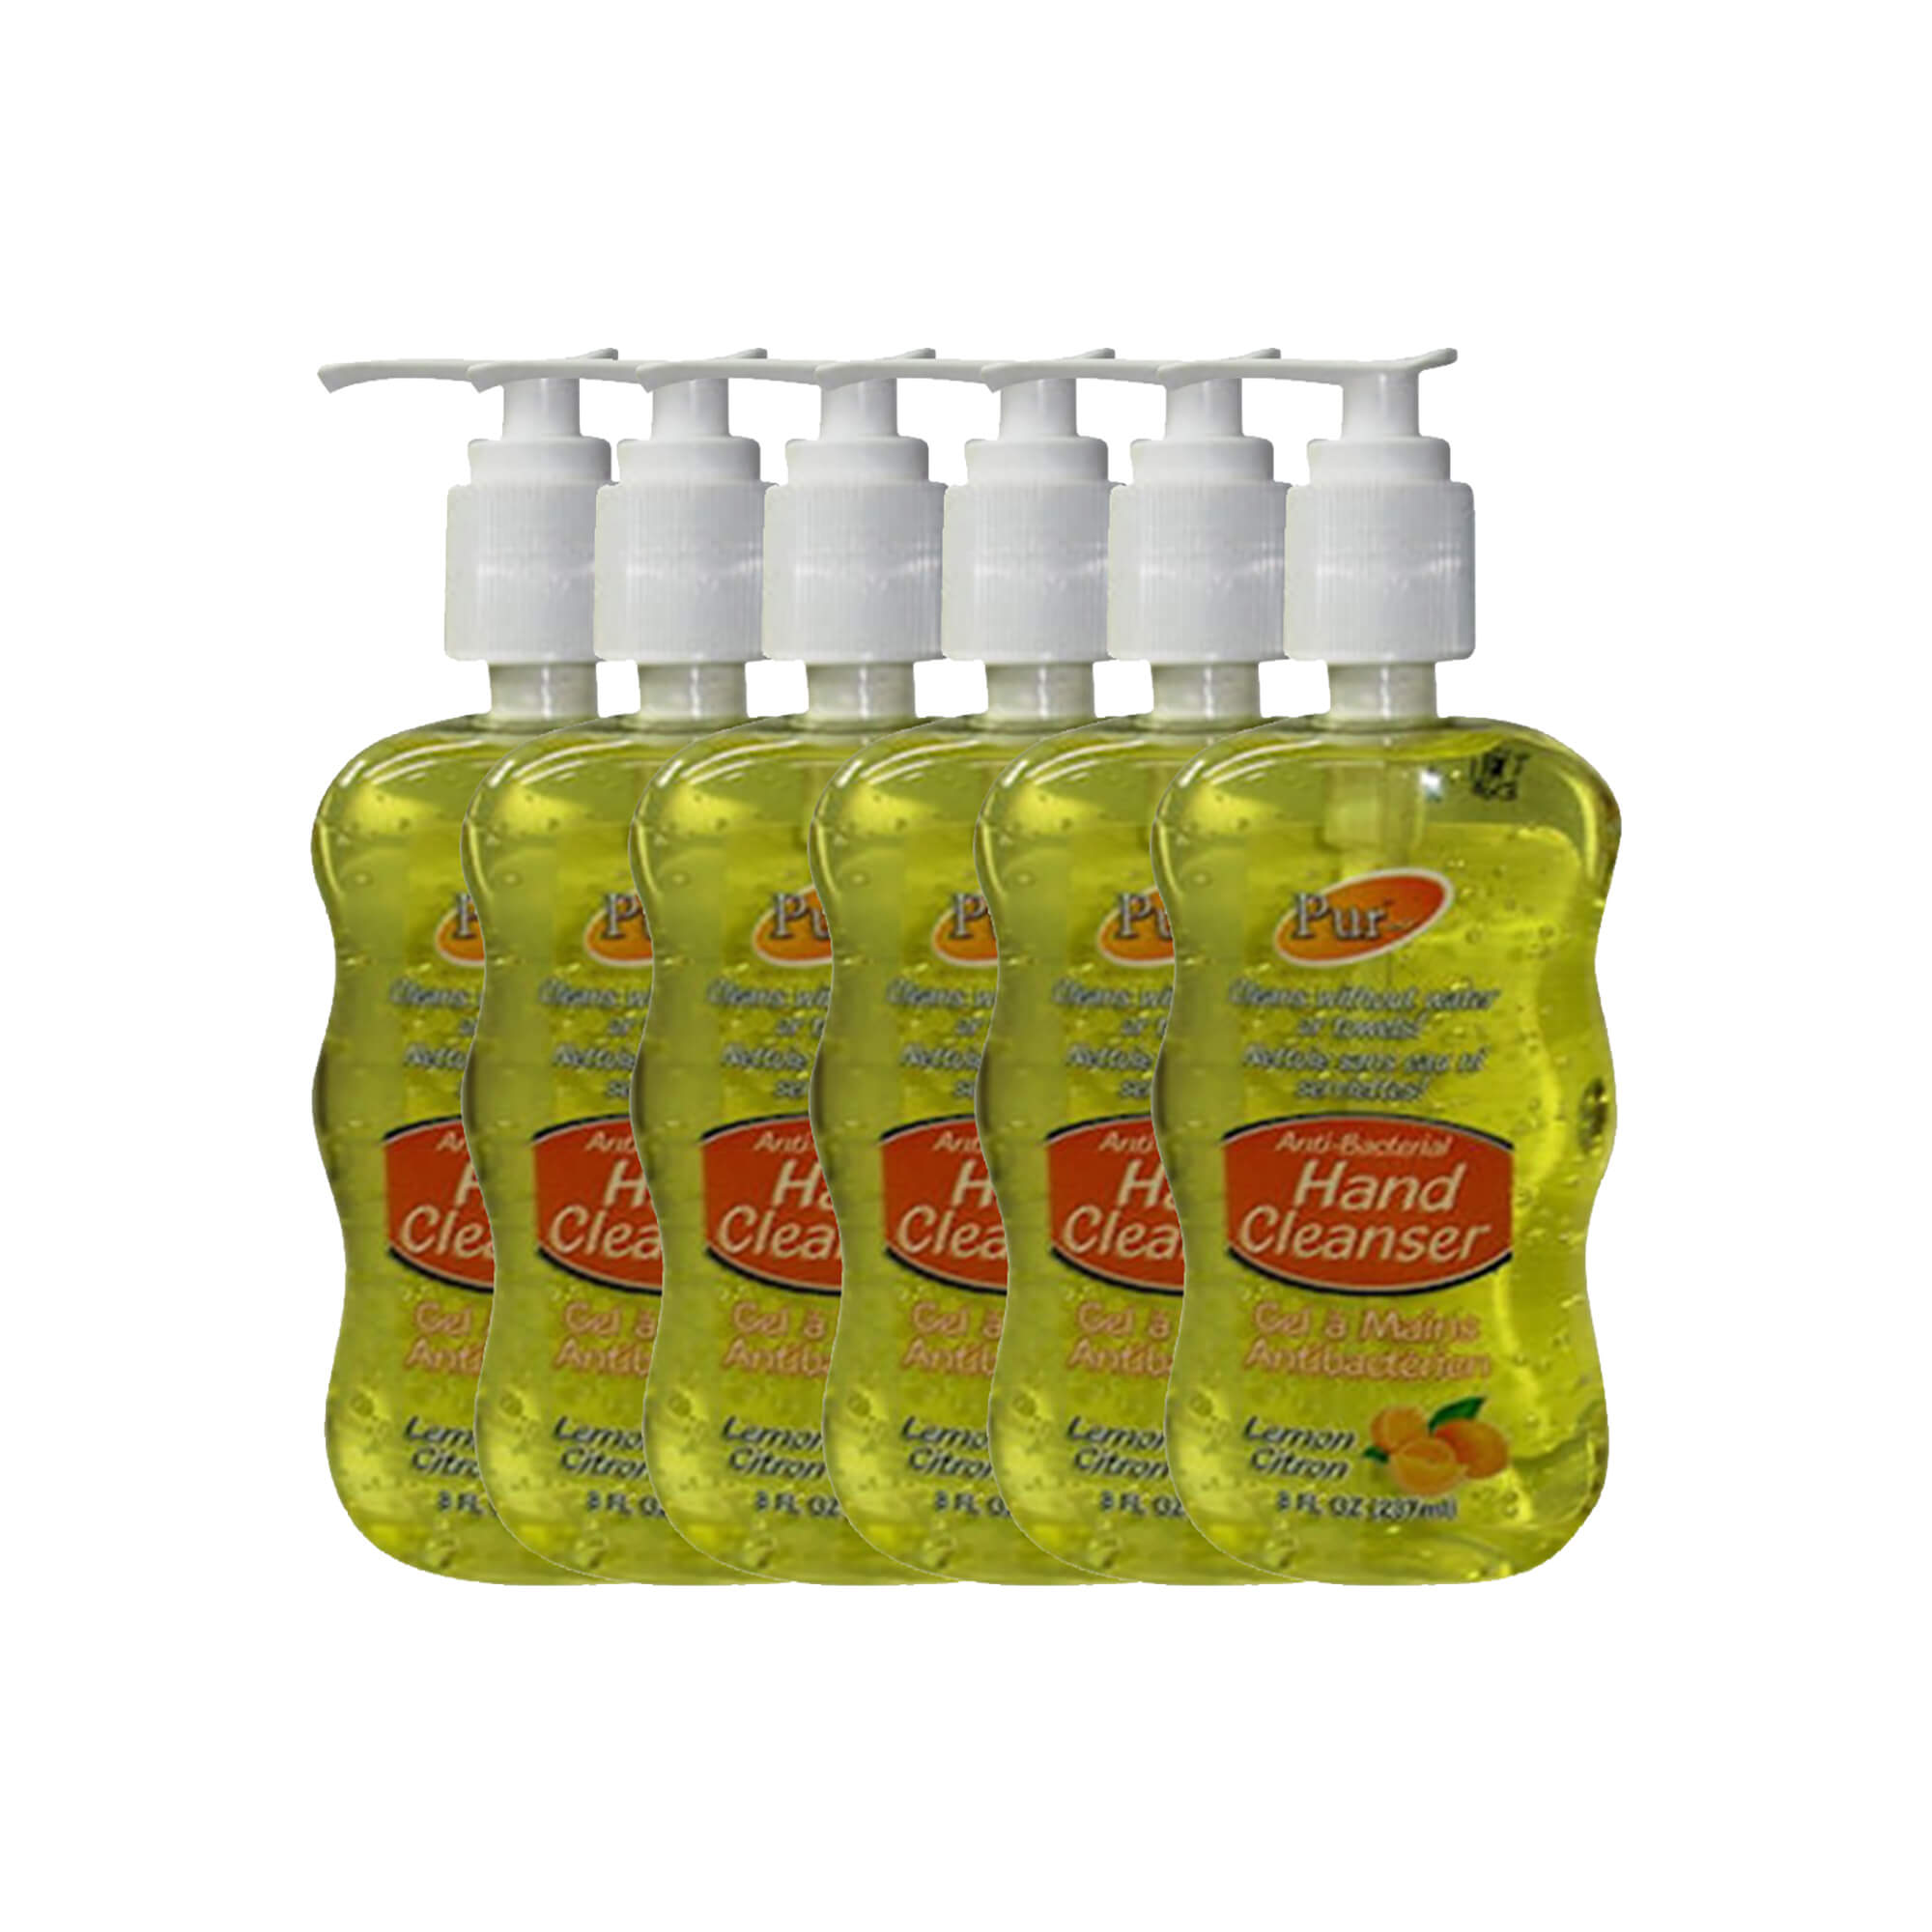 Purest Anti-Bacterial Hand Cleanser With Lemon 237ml, 6 Pack